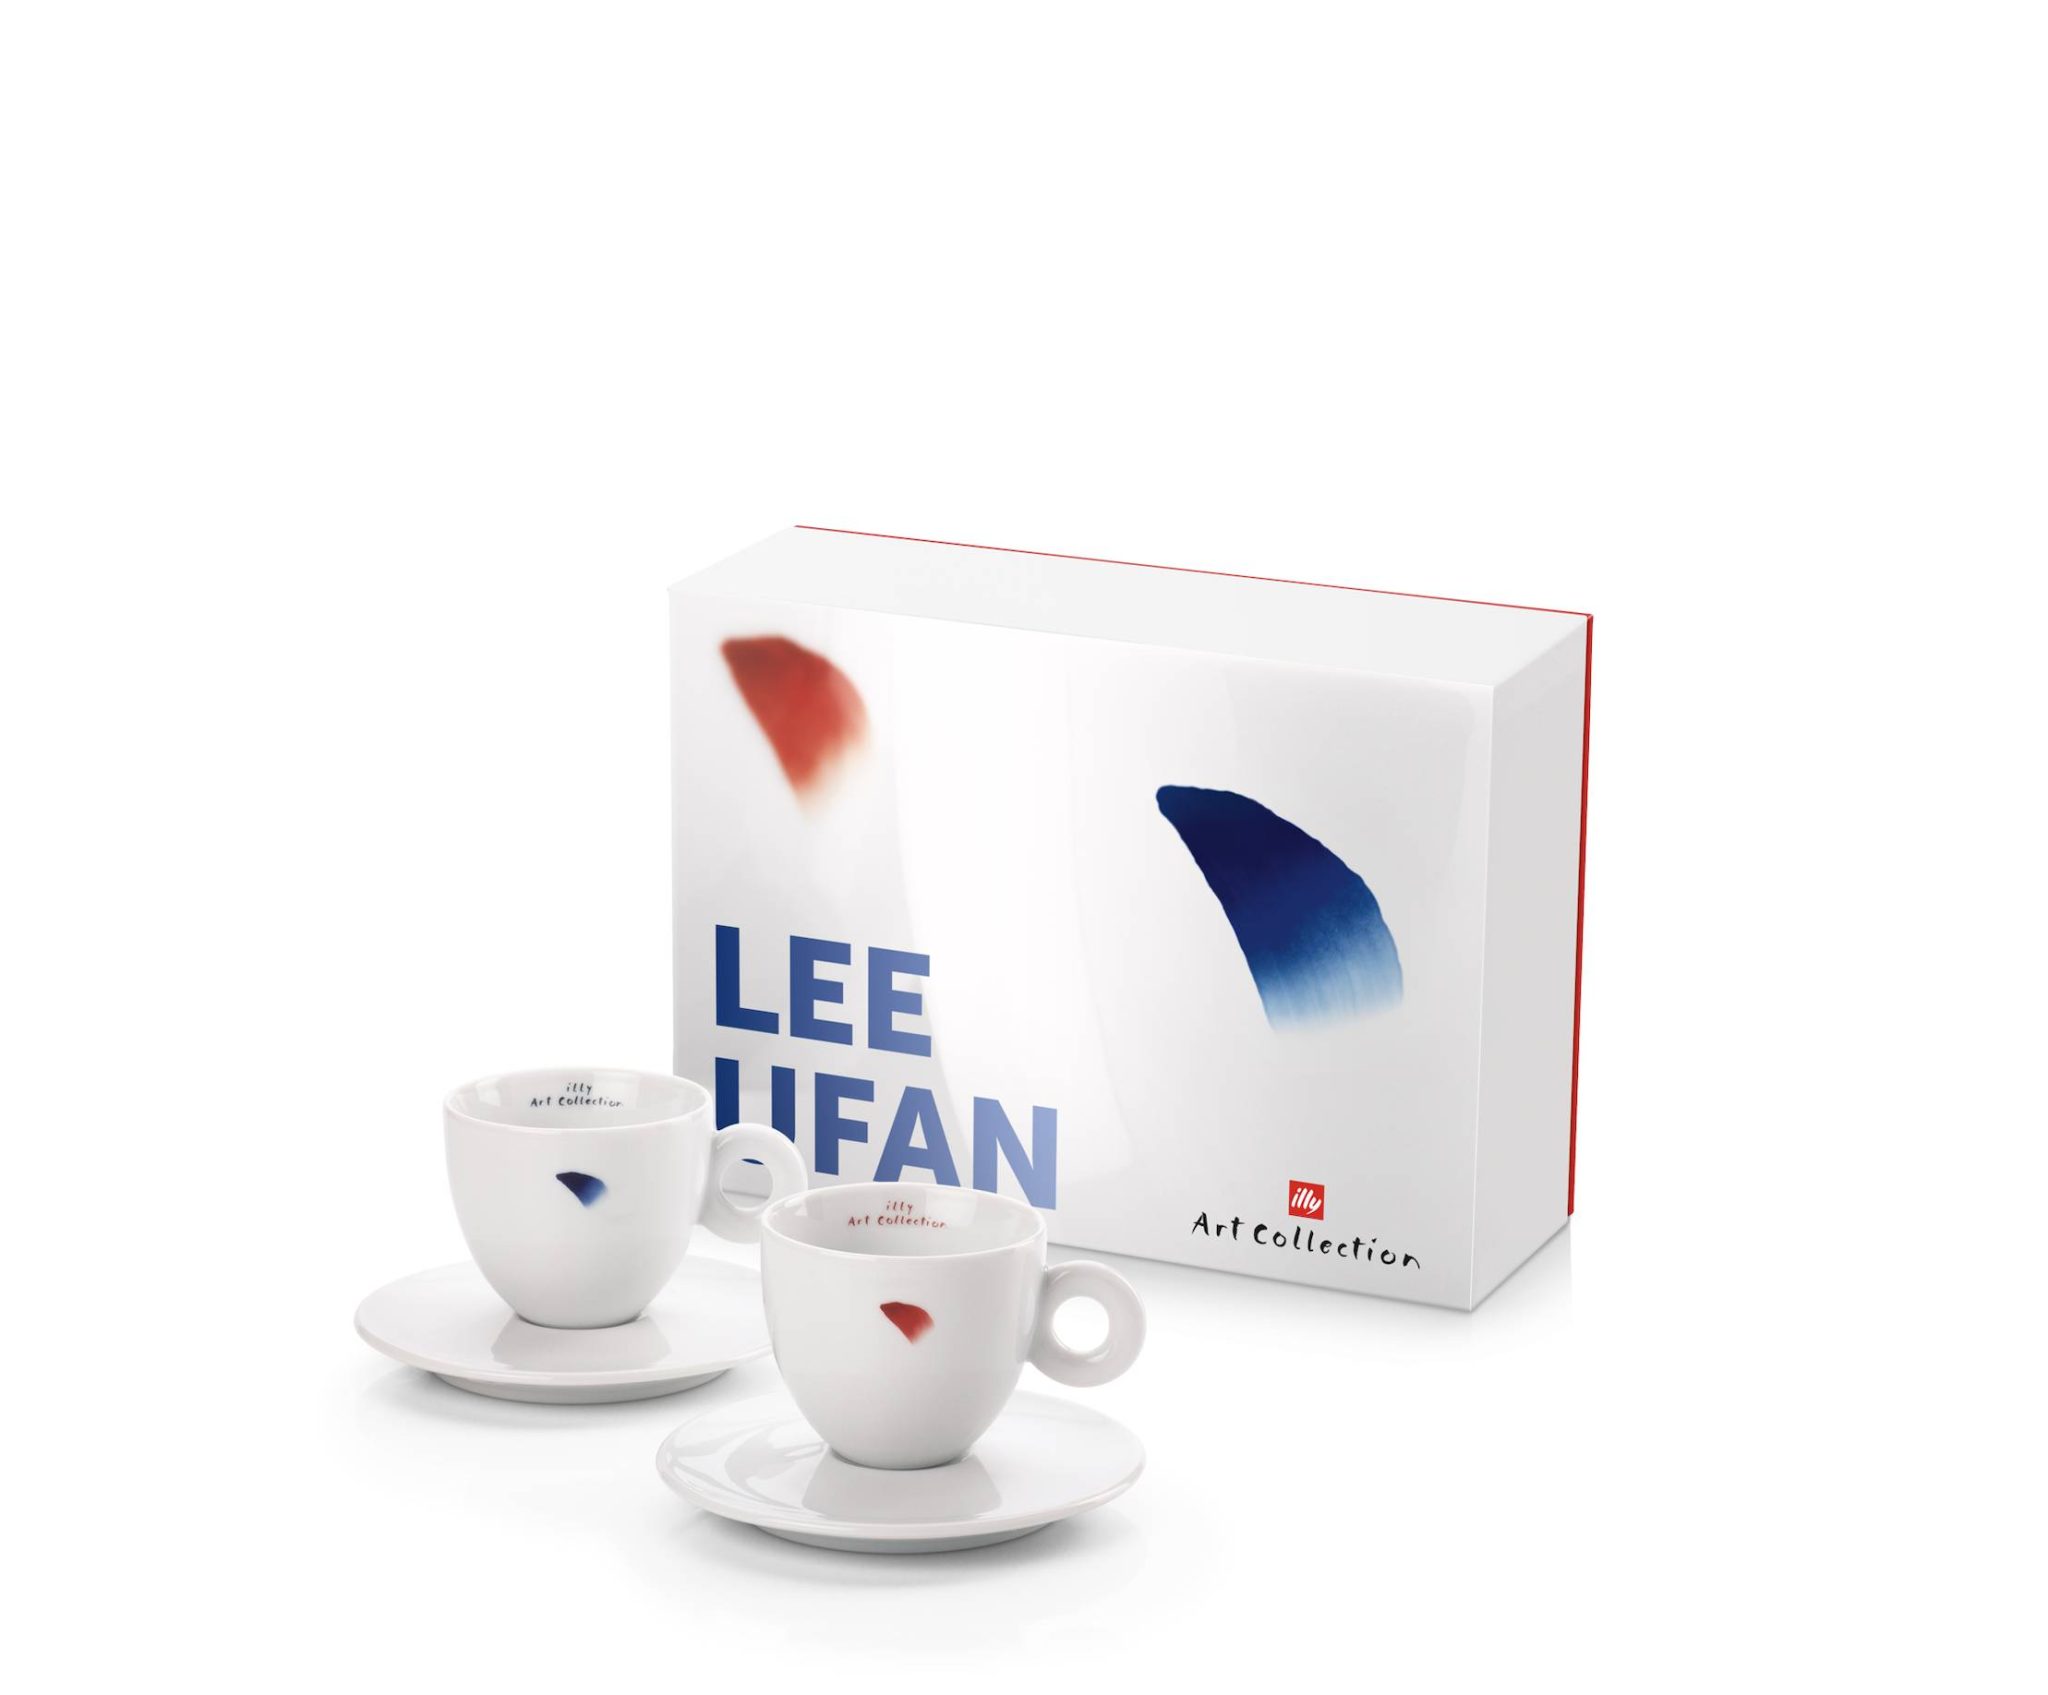 The illy Art Collection: contemporary art coffee cups